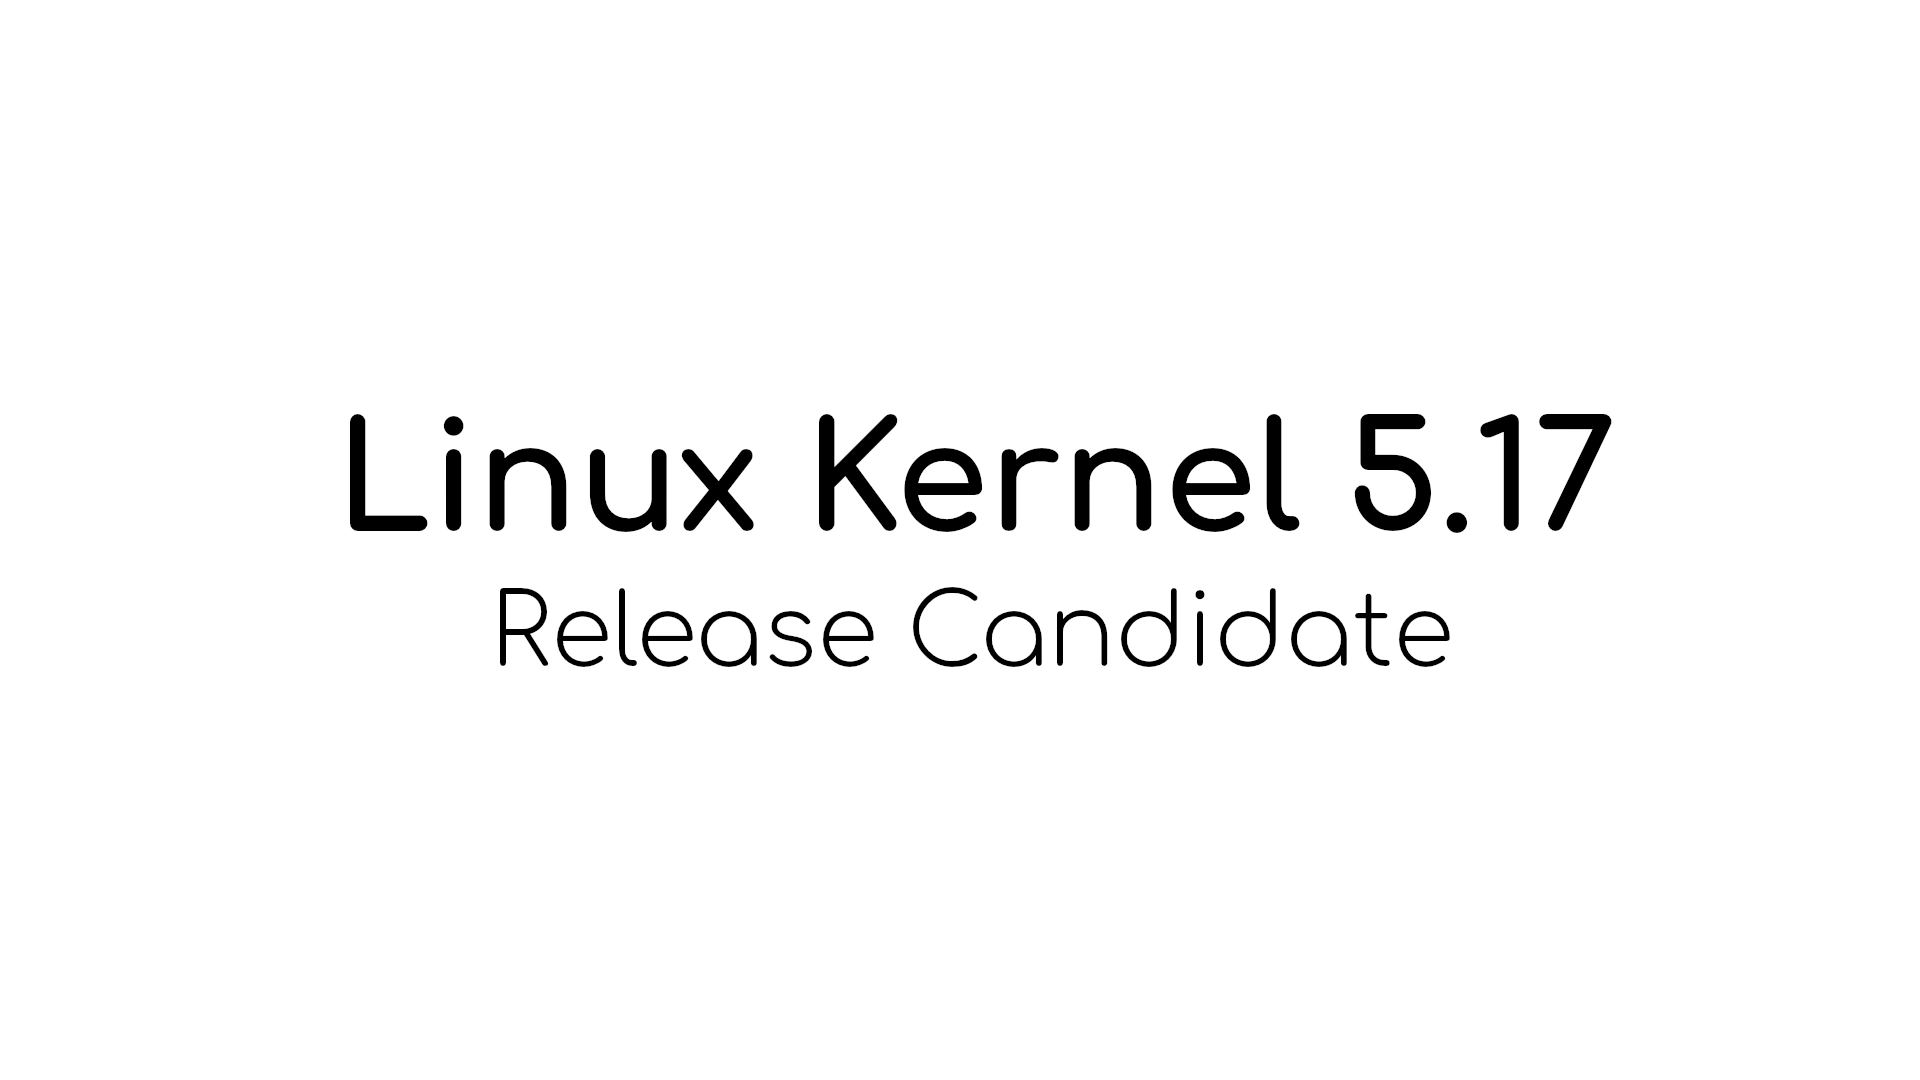 Linus Torvalds Announces First Linux 5.17 Kernel Release Candidate